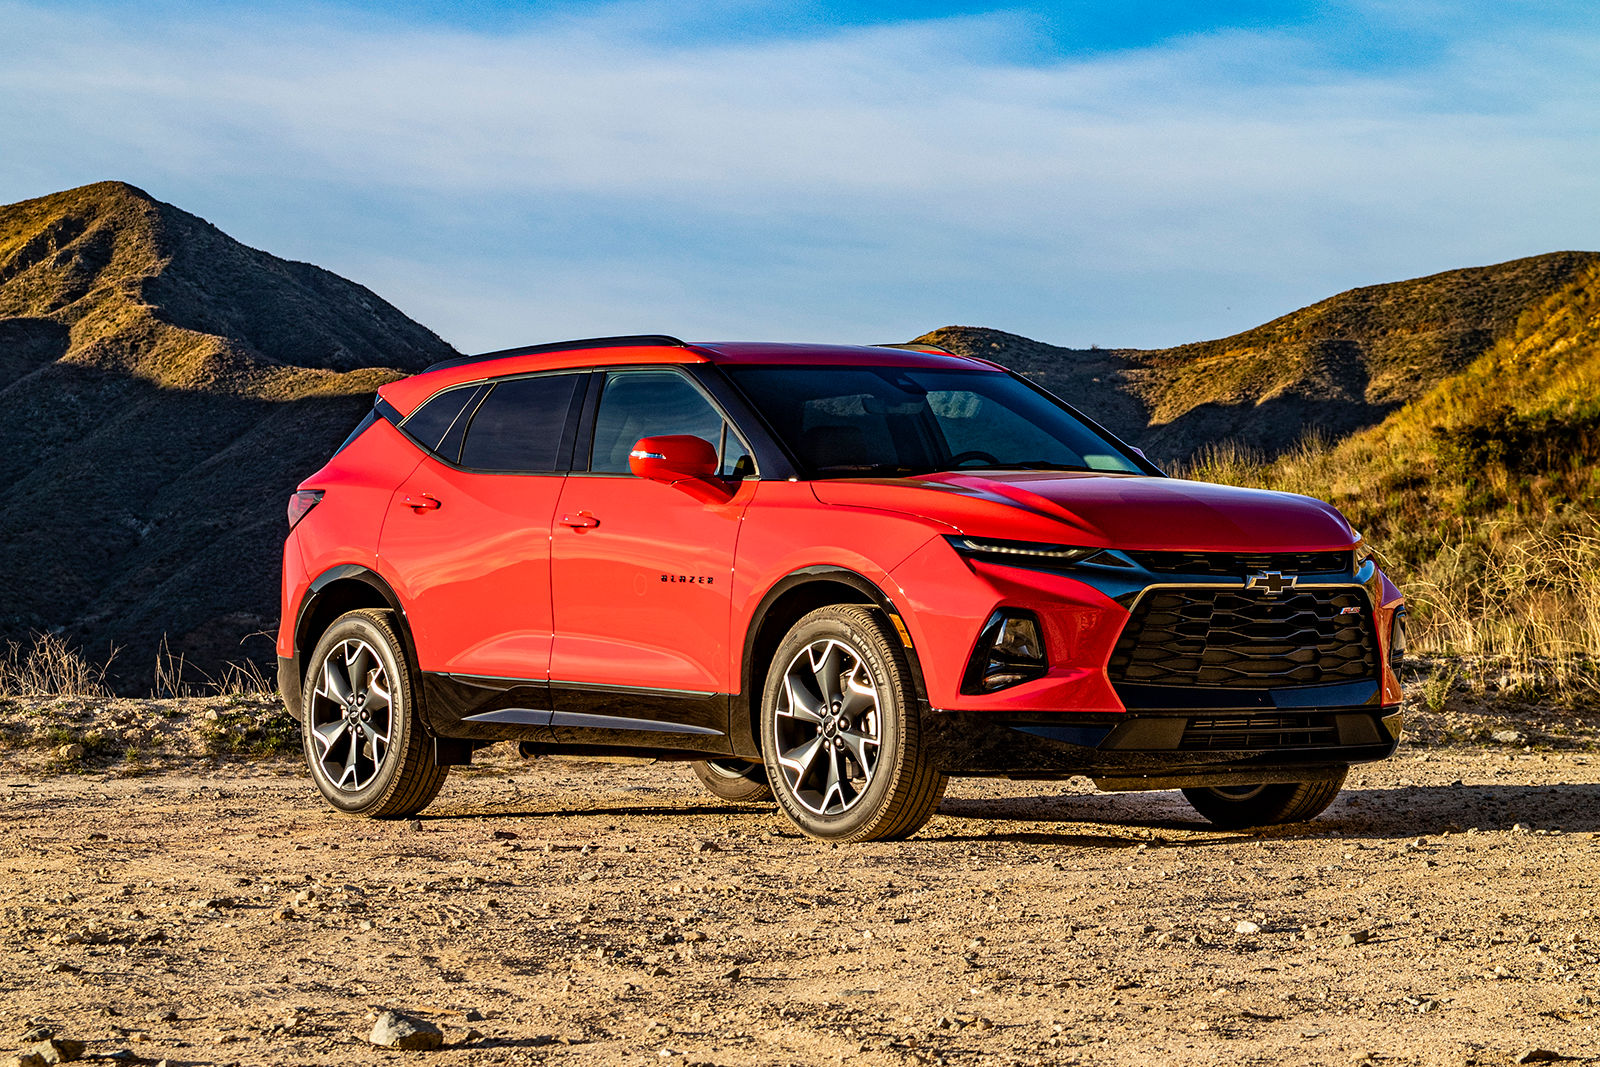 Illustration for article titled 2020 Chevy Blazer RS Review and Road Trip!